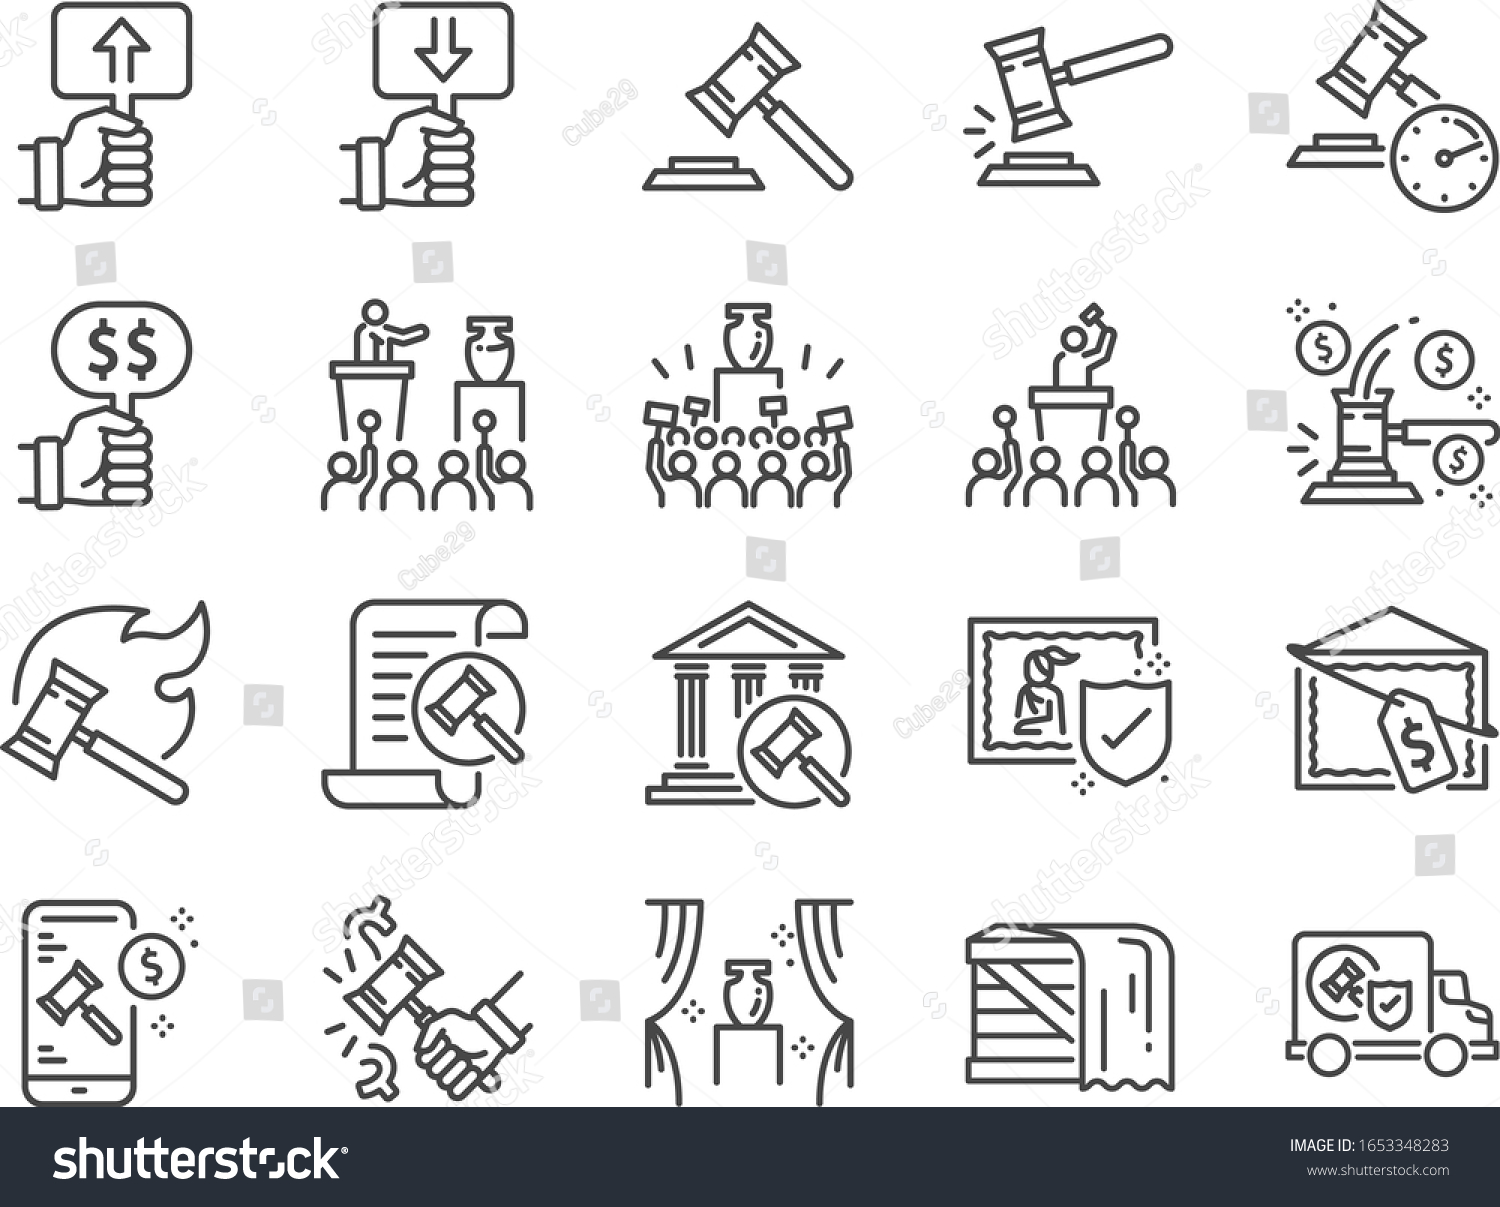 Auction line icon set. Included icons as hammer, price, bidding, judge, auction hammer, painting, deal and more. #1653348283